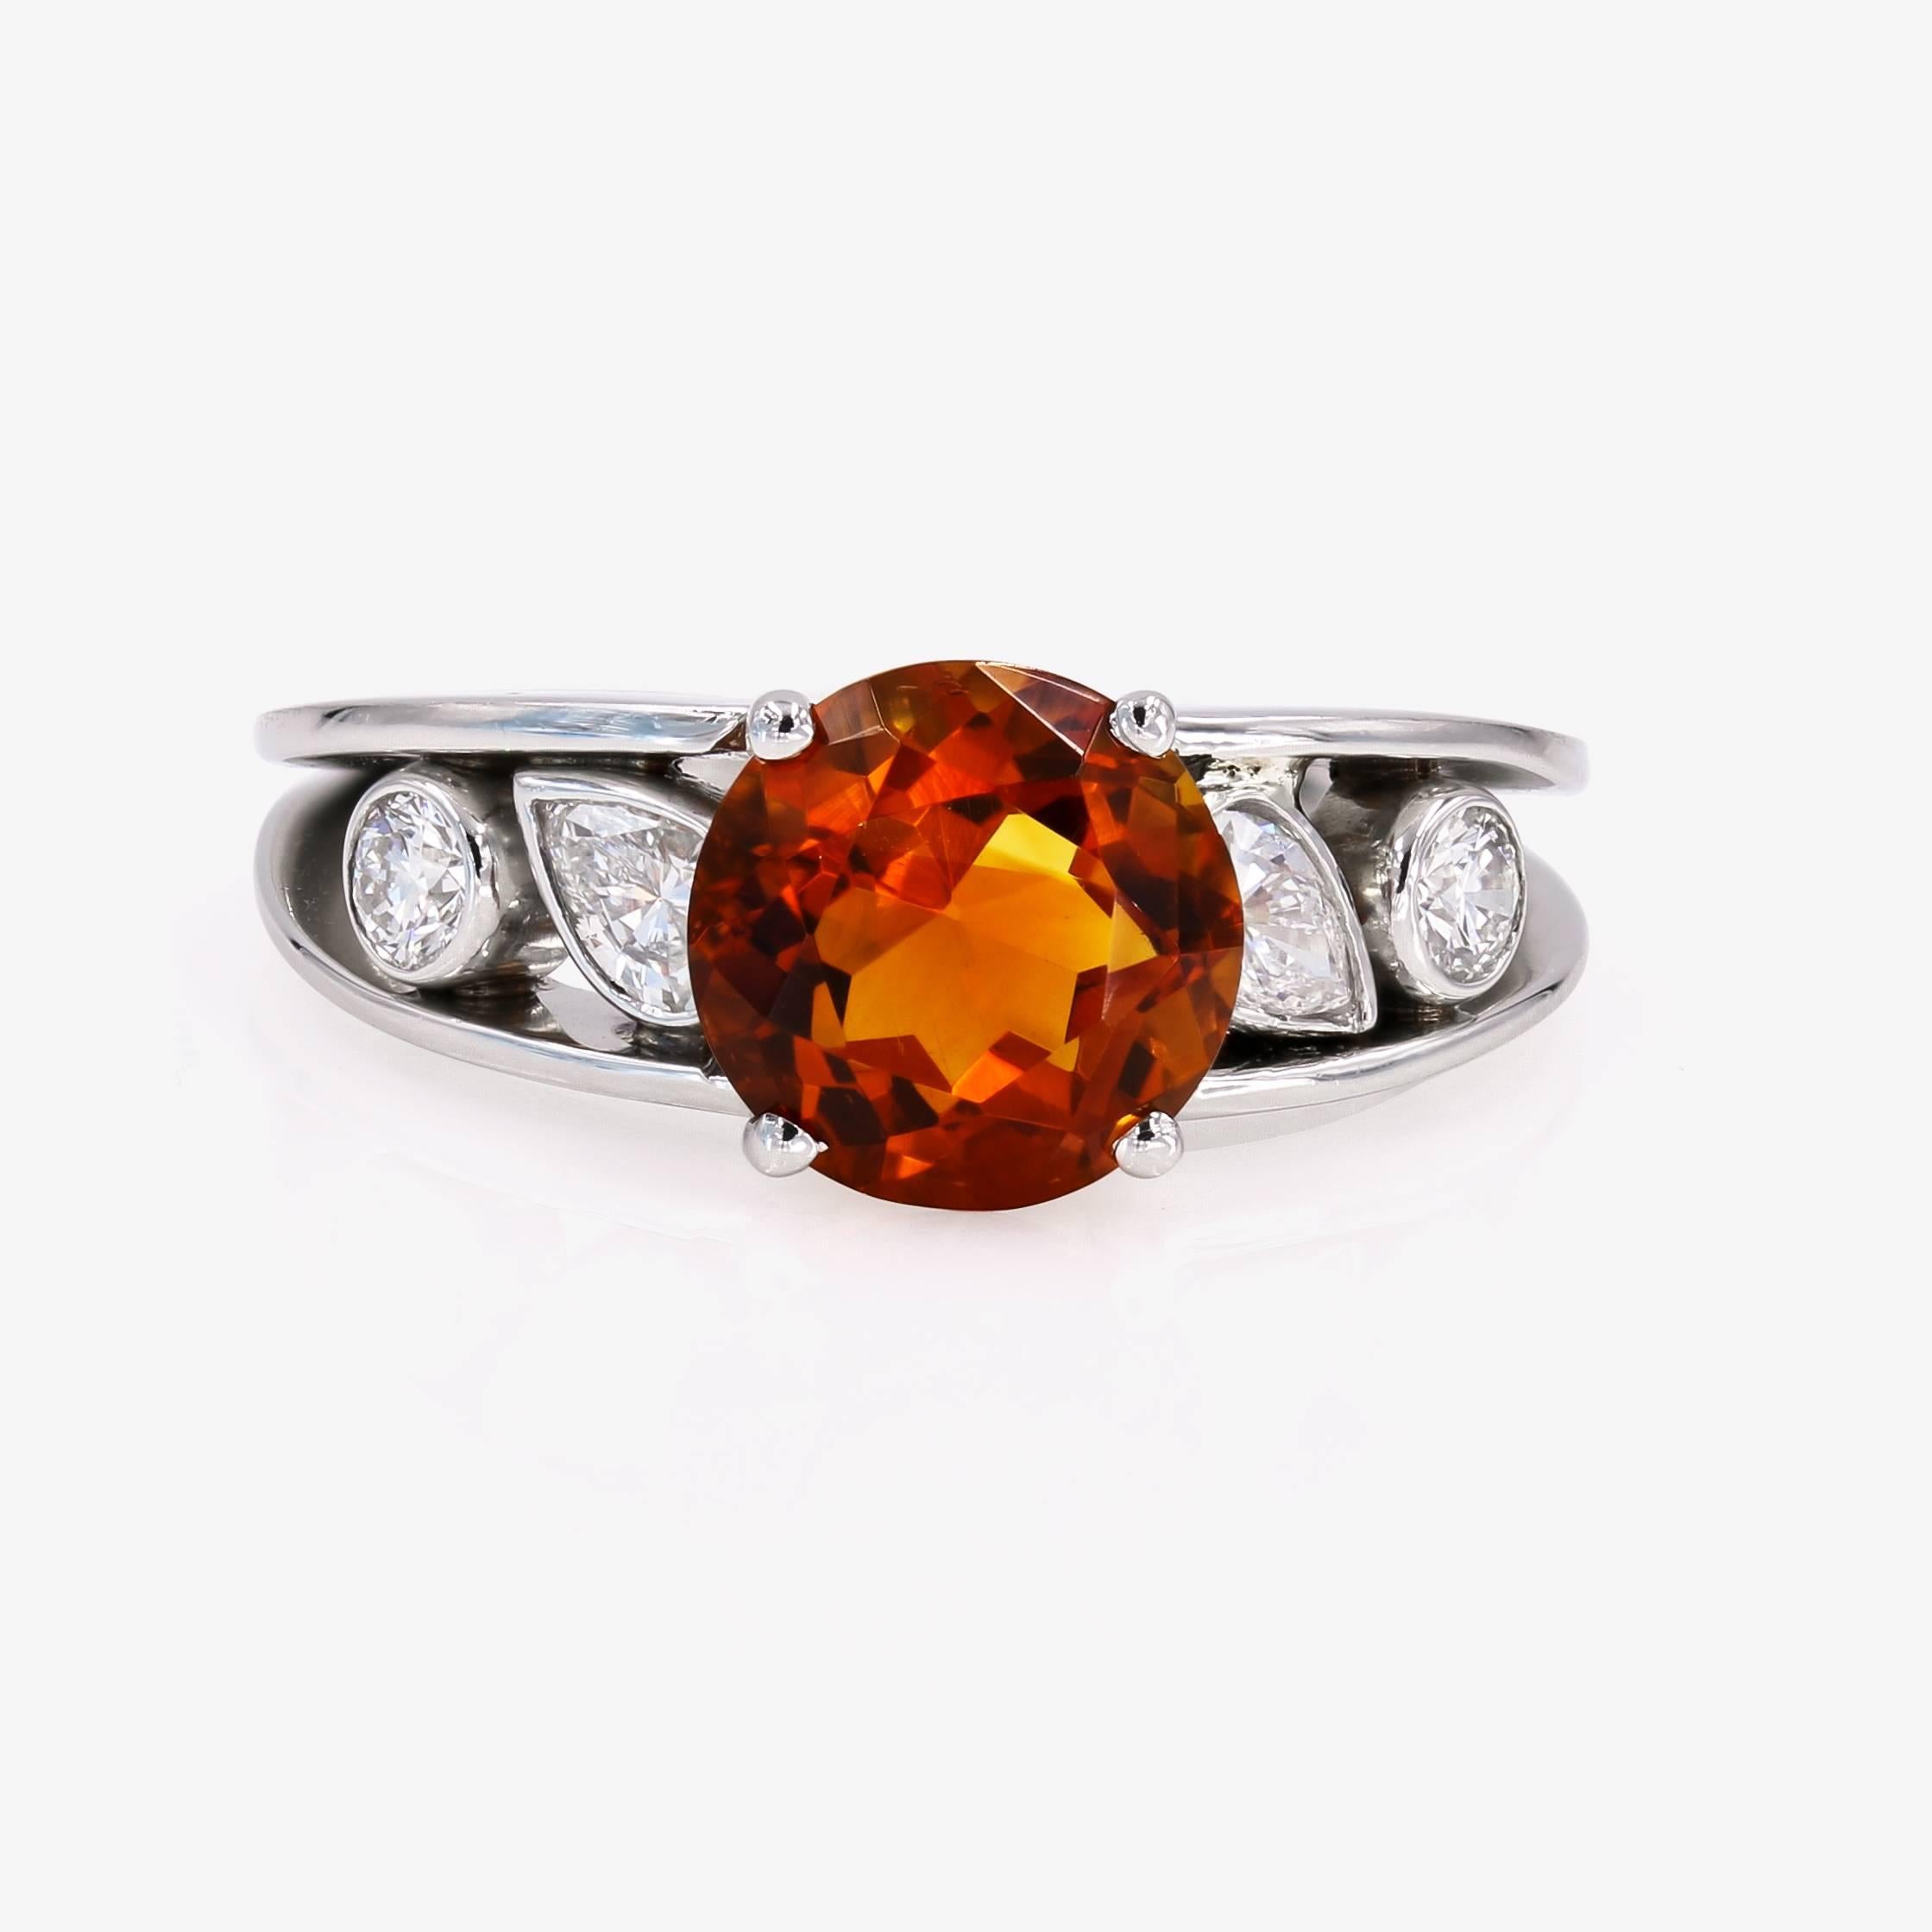 This vibrant ring contains a 3.00cts. round center citrine of orange-brownish color. There are 2 pear shape diamonds on the sides=.39ct. t.w. and 2 ideal cut round diamonds=.24ct. t.w. The ring is set in platinum.
(diamonds are G in color and VS